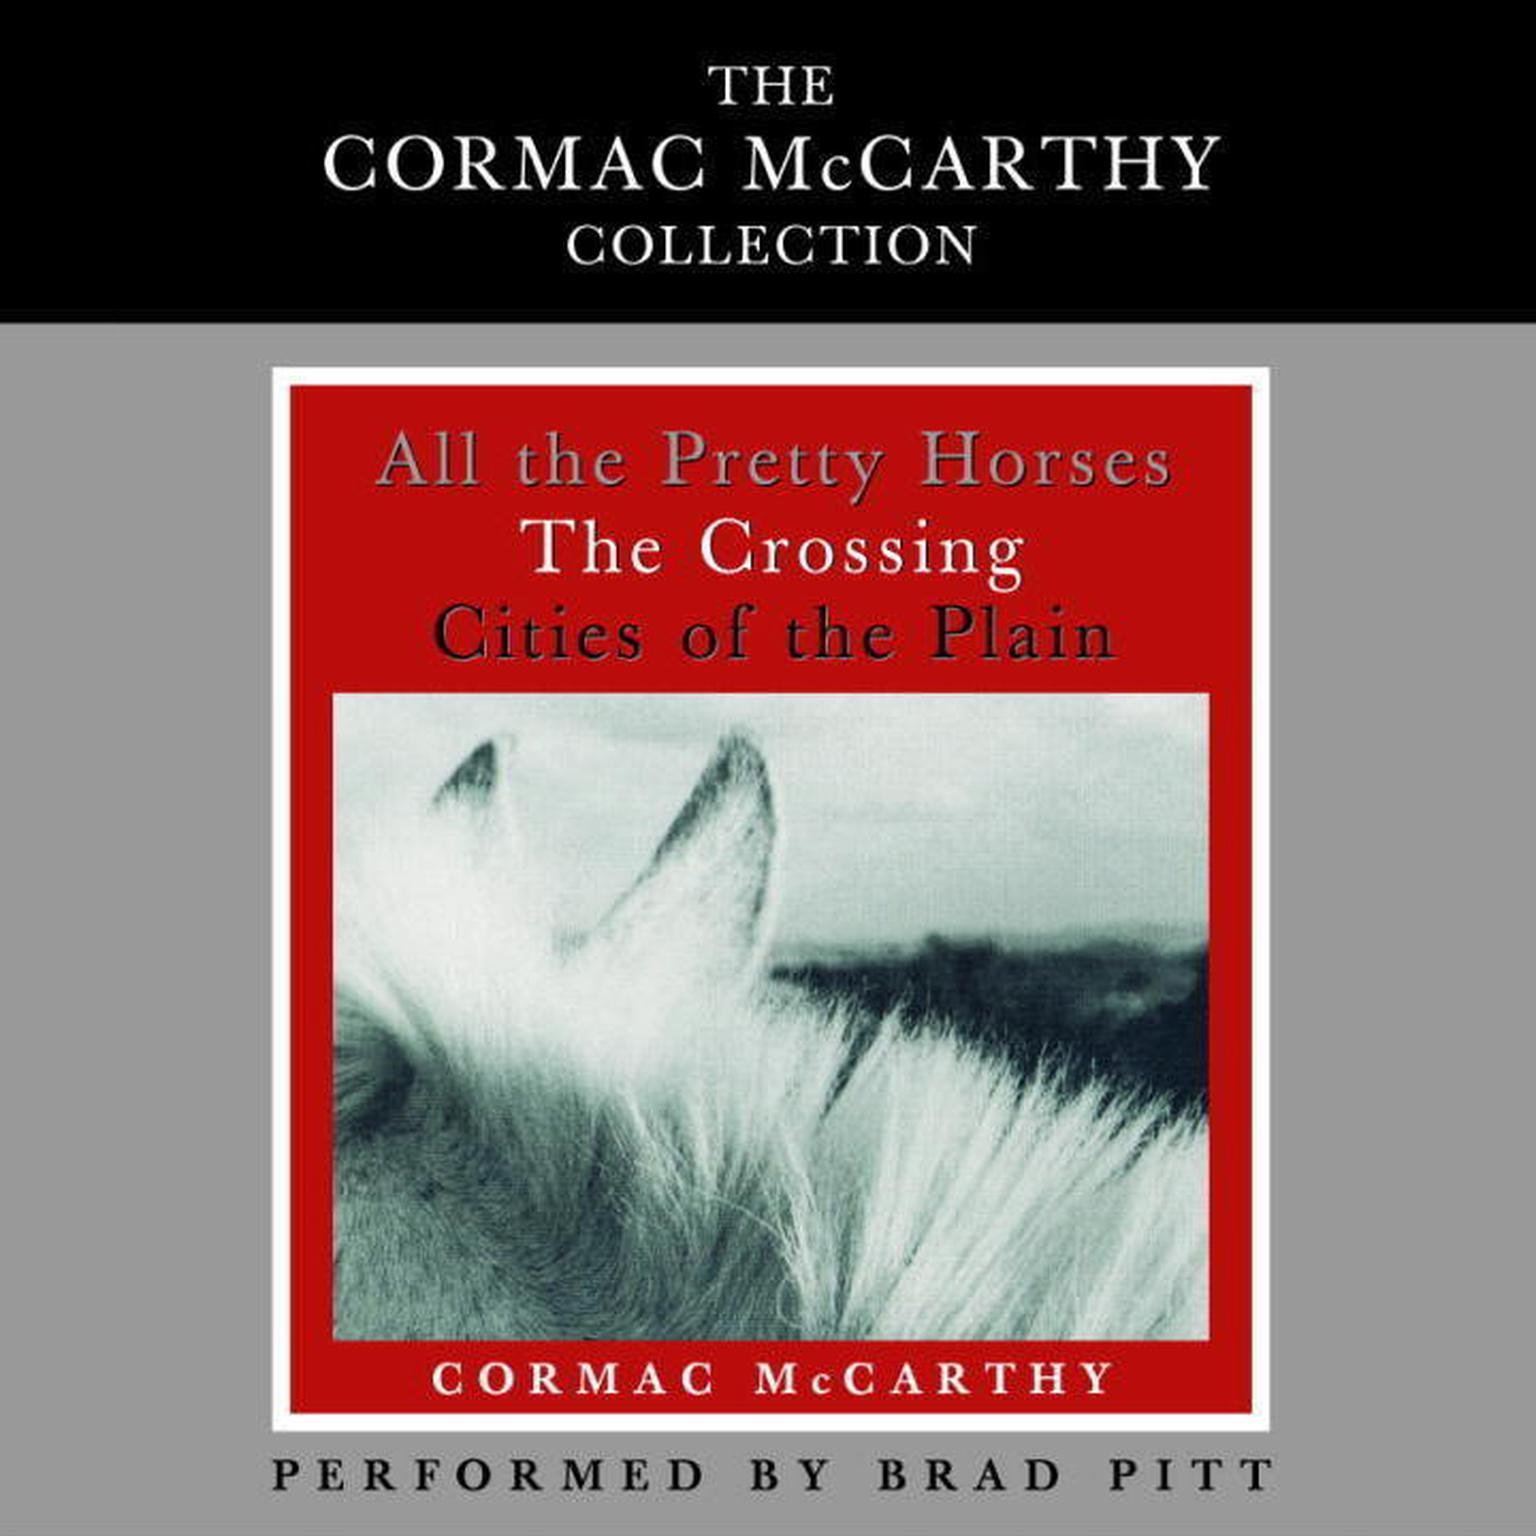 The Cormac McCarthy Value Collection (Abridged) Audiobook, by Cormac McCarthy